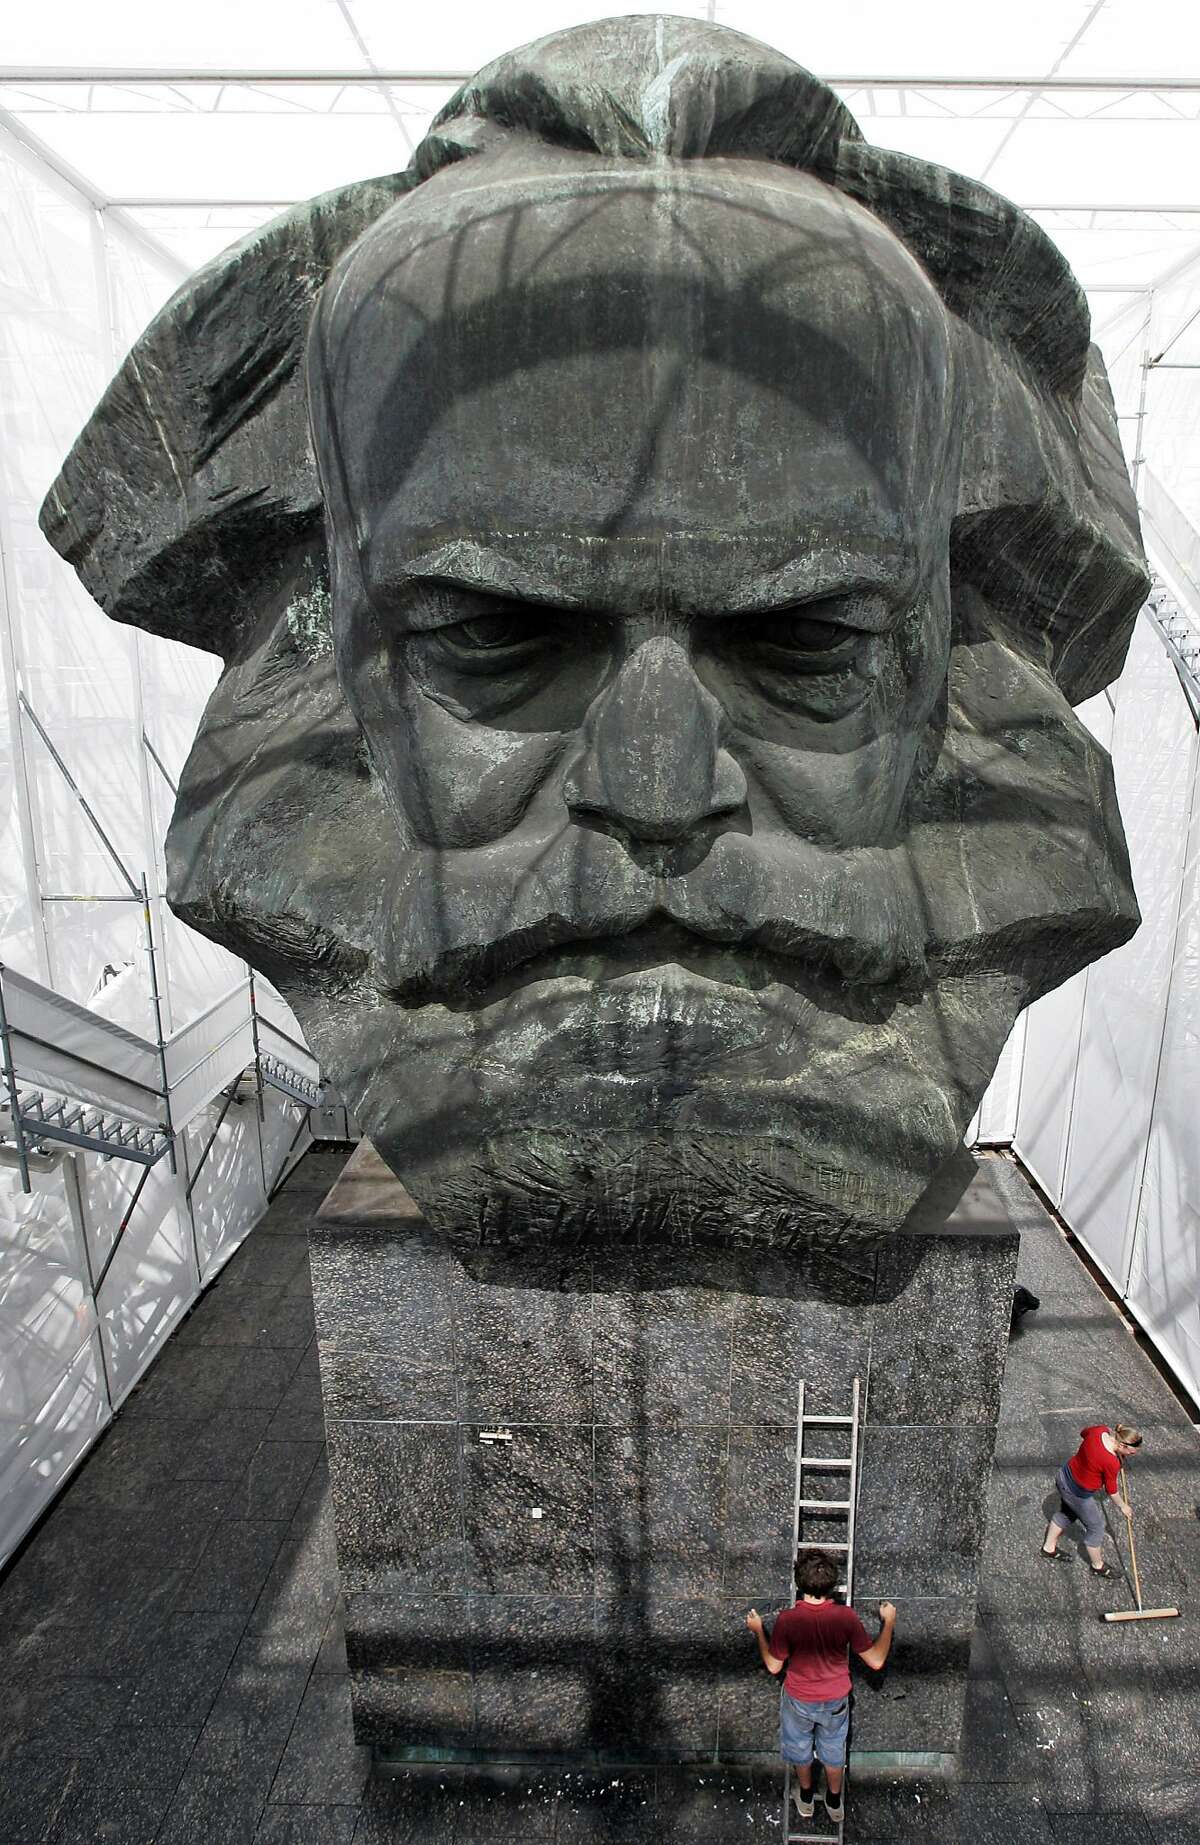 Workers clean up at the so-called "Temporary Museum of Modern Marx" walk on the steps past the plastic bust sculpture of German communist theorist Karl Marx in eastern German city of Chemnitz on June 17, 2008. The 13-meter sculpture by Soviet artist Lew Kerbel was unveiled in 1971 in the city then known as Karl-Marx-Stadt, has now been enclosed in a tent like covering by students of the art college in Linz, Austria. AFP PHOTO DDP / UWE MEINHOLD GERMANY OUT (Photo credit should read UWE MEINHOLD/AFP/Getty Images)